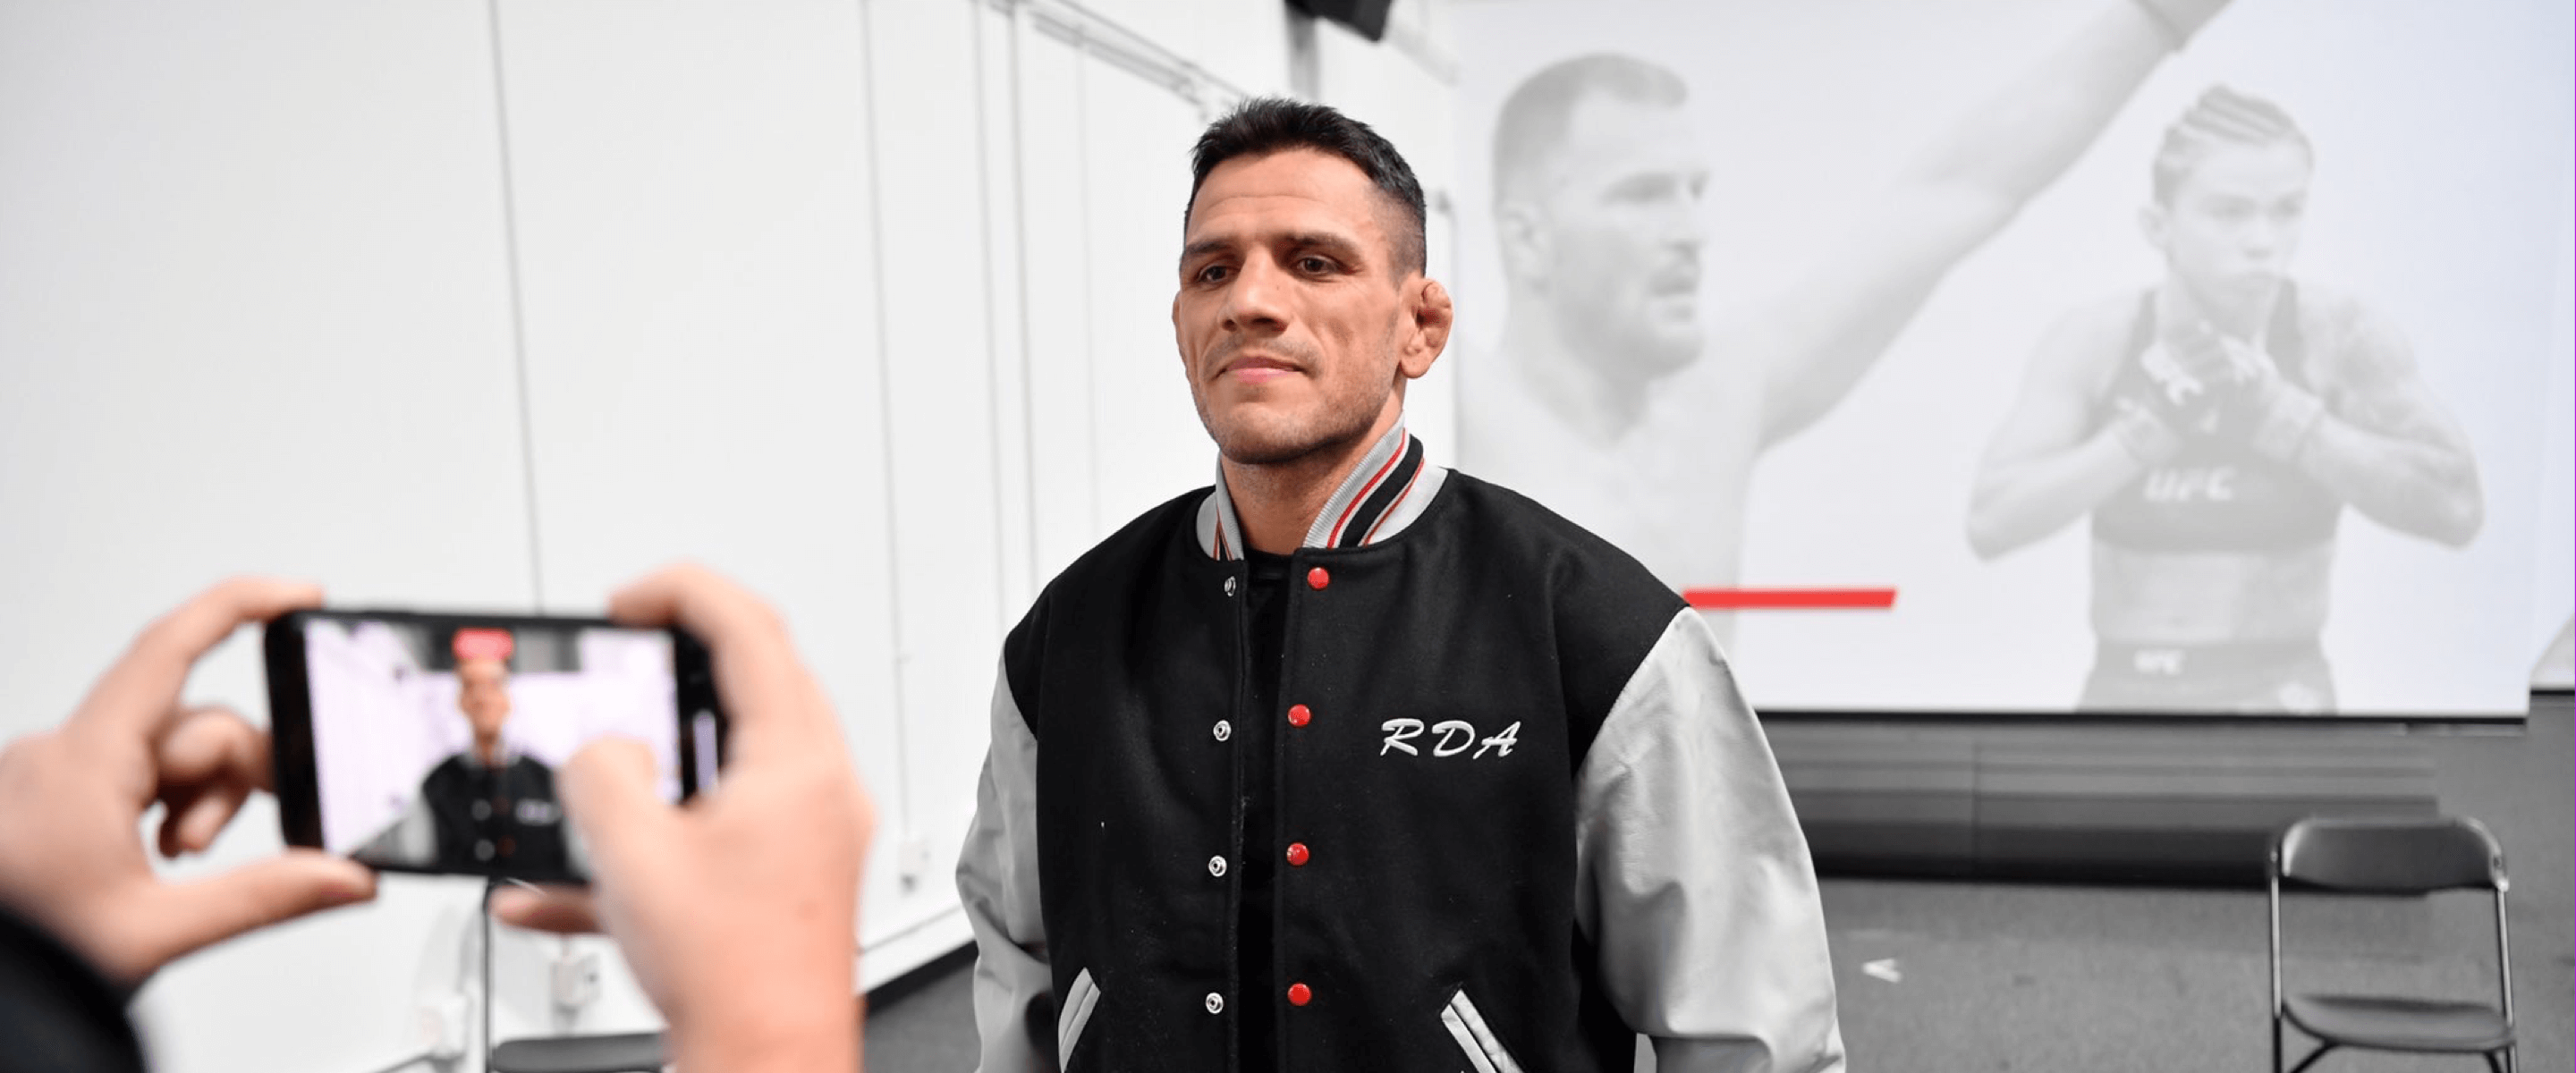 Rafael dos Anjos receiving his jacket for 50 clean tests